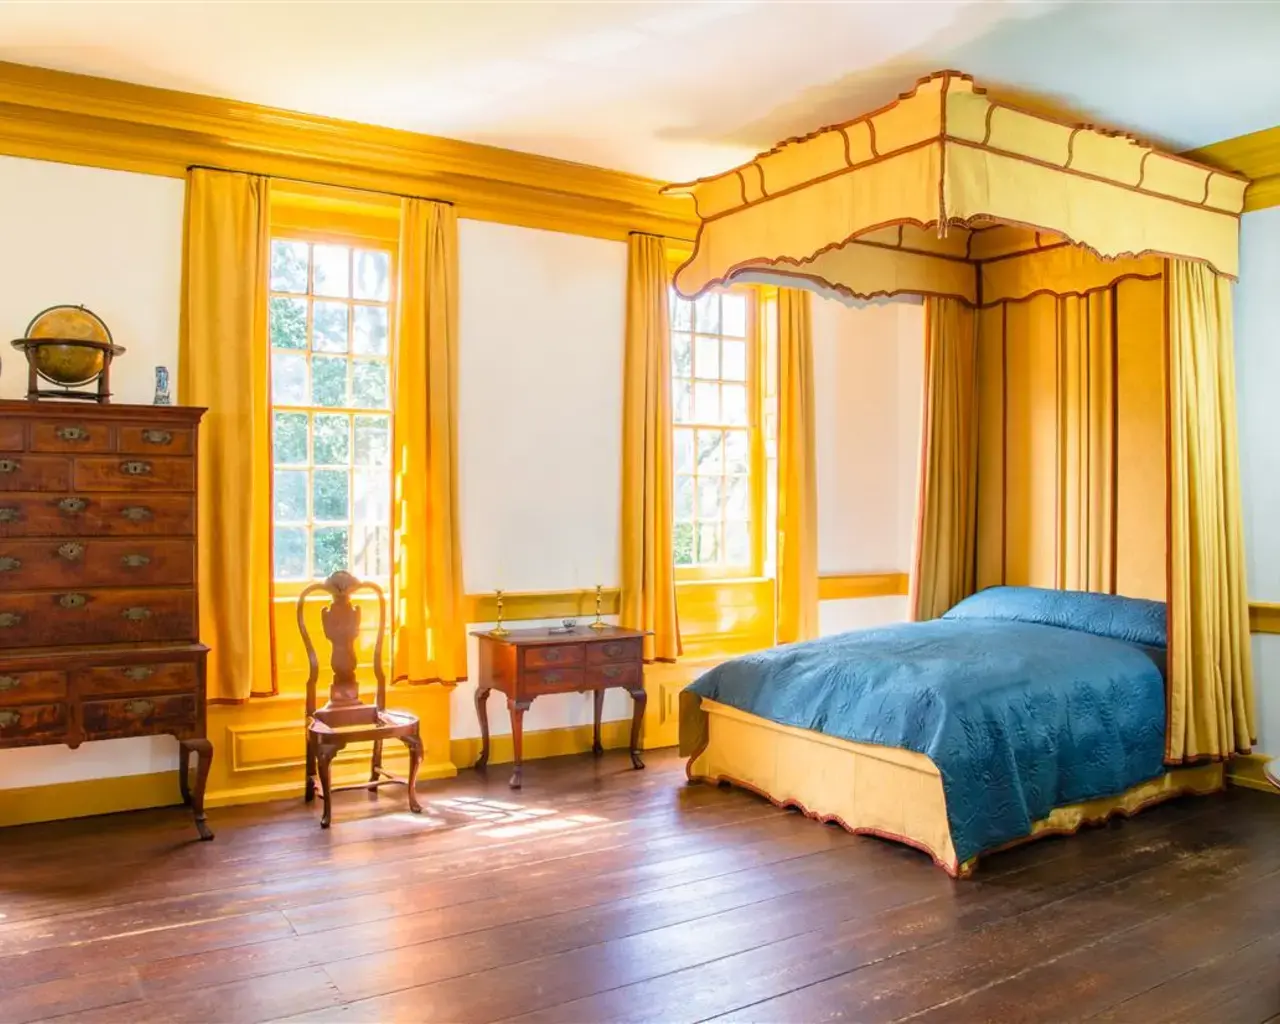 Stenton, recently restored Yellow Lodging Room. Photo by Jere Paolini, 2017.